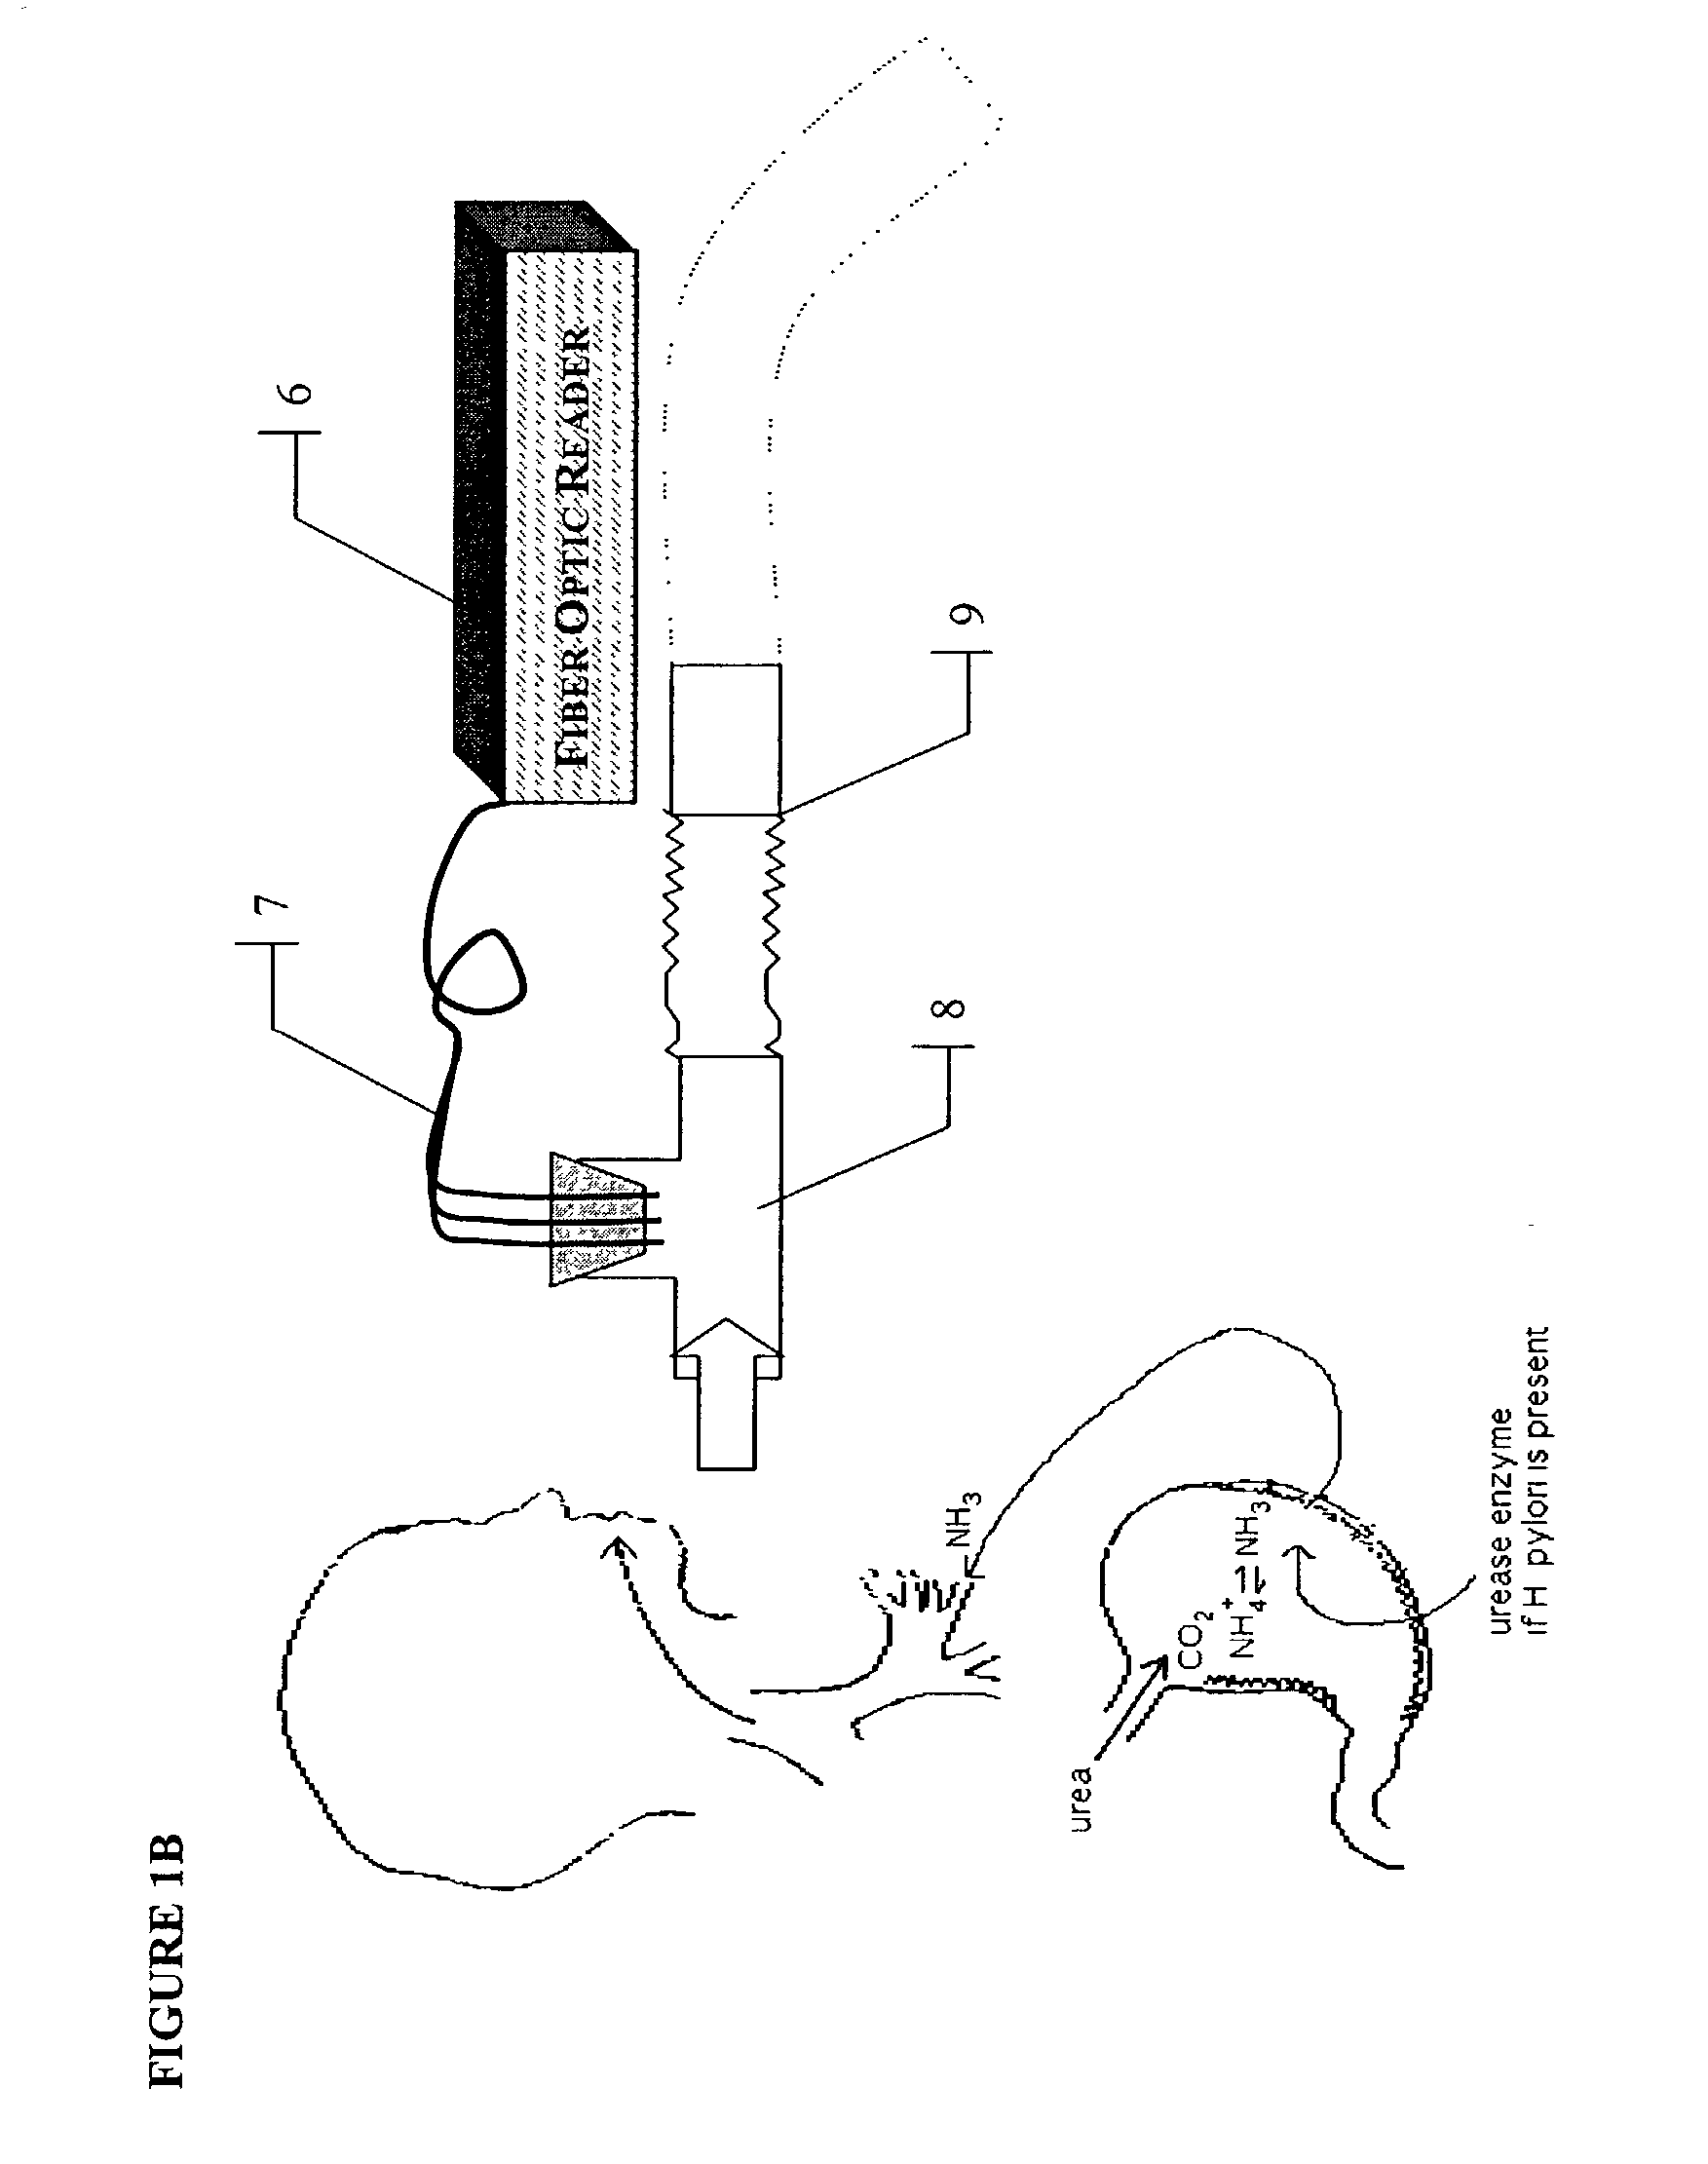 Method for diagnosis of helicobacter pylori infection